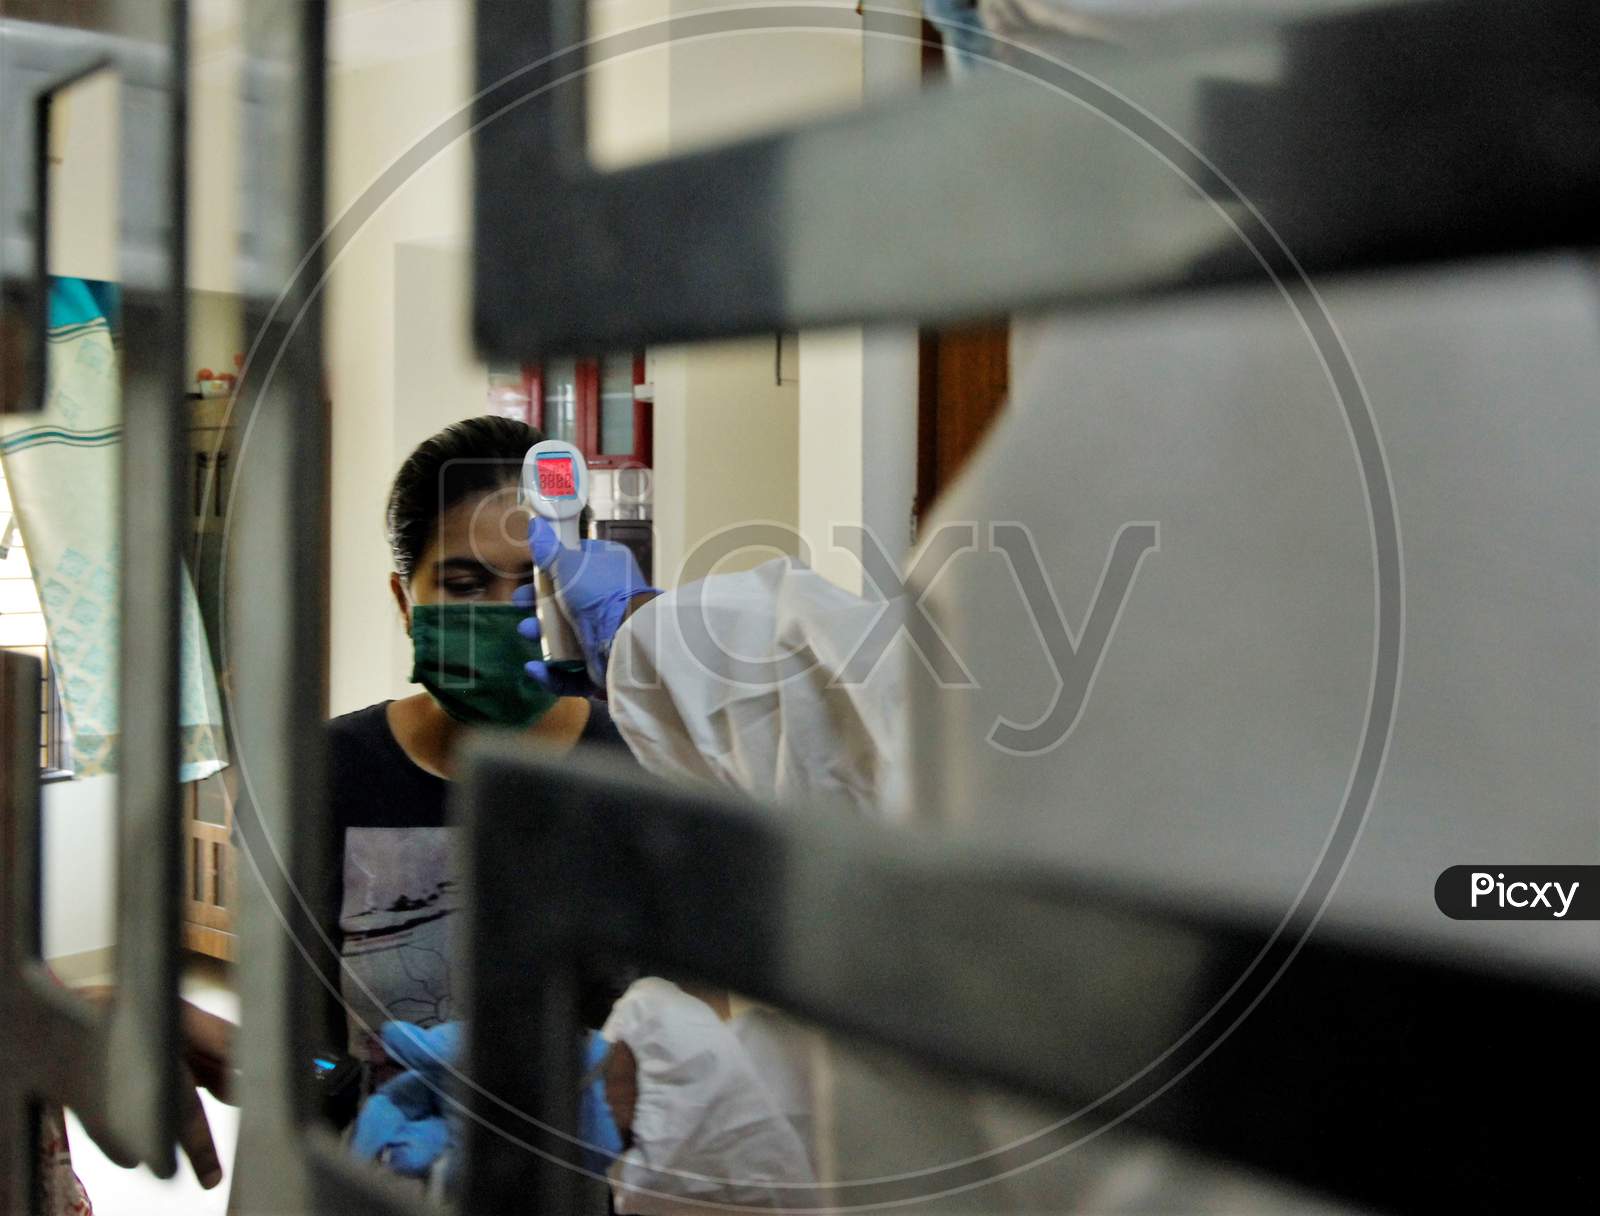 A healthcare worker wearing personal protective equipment (PPE) checks the temperature of a resident during a check-up campaign for the coronavirus disease (COVID-19), in Mumbai, India on July 26, 2020.